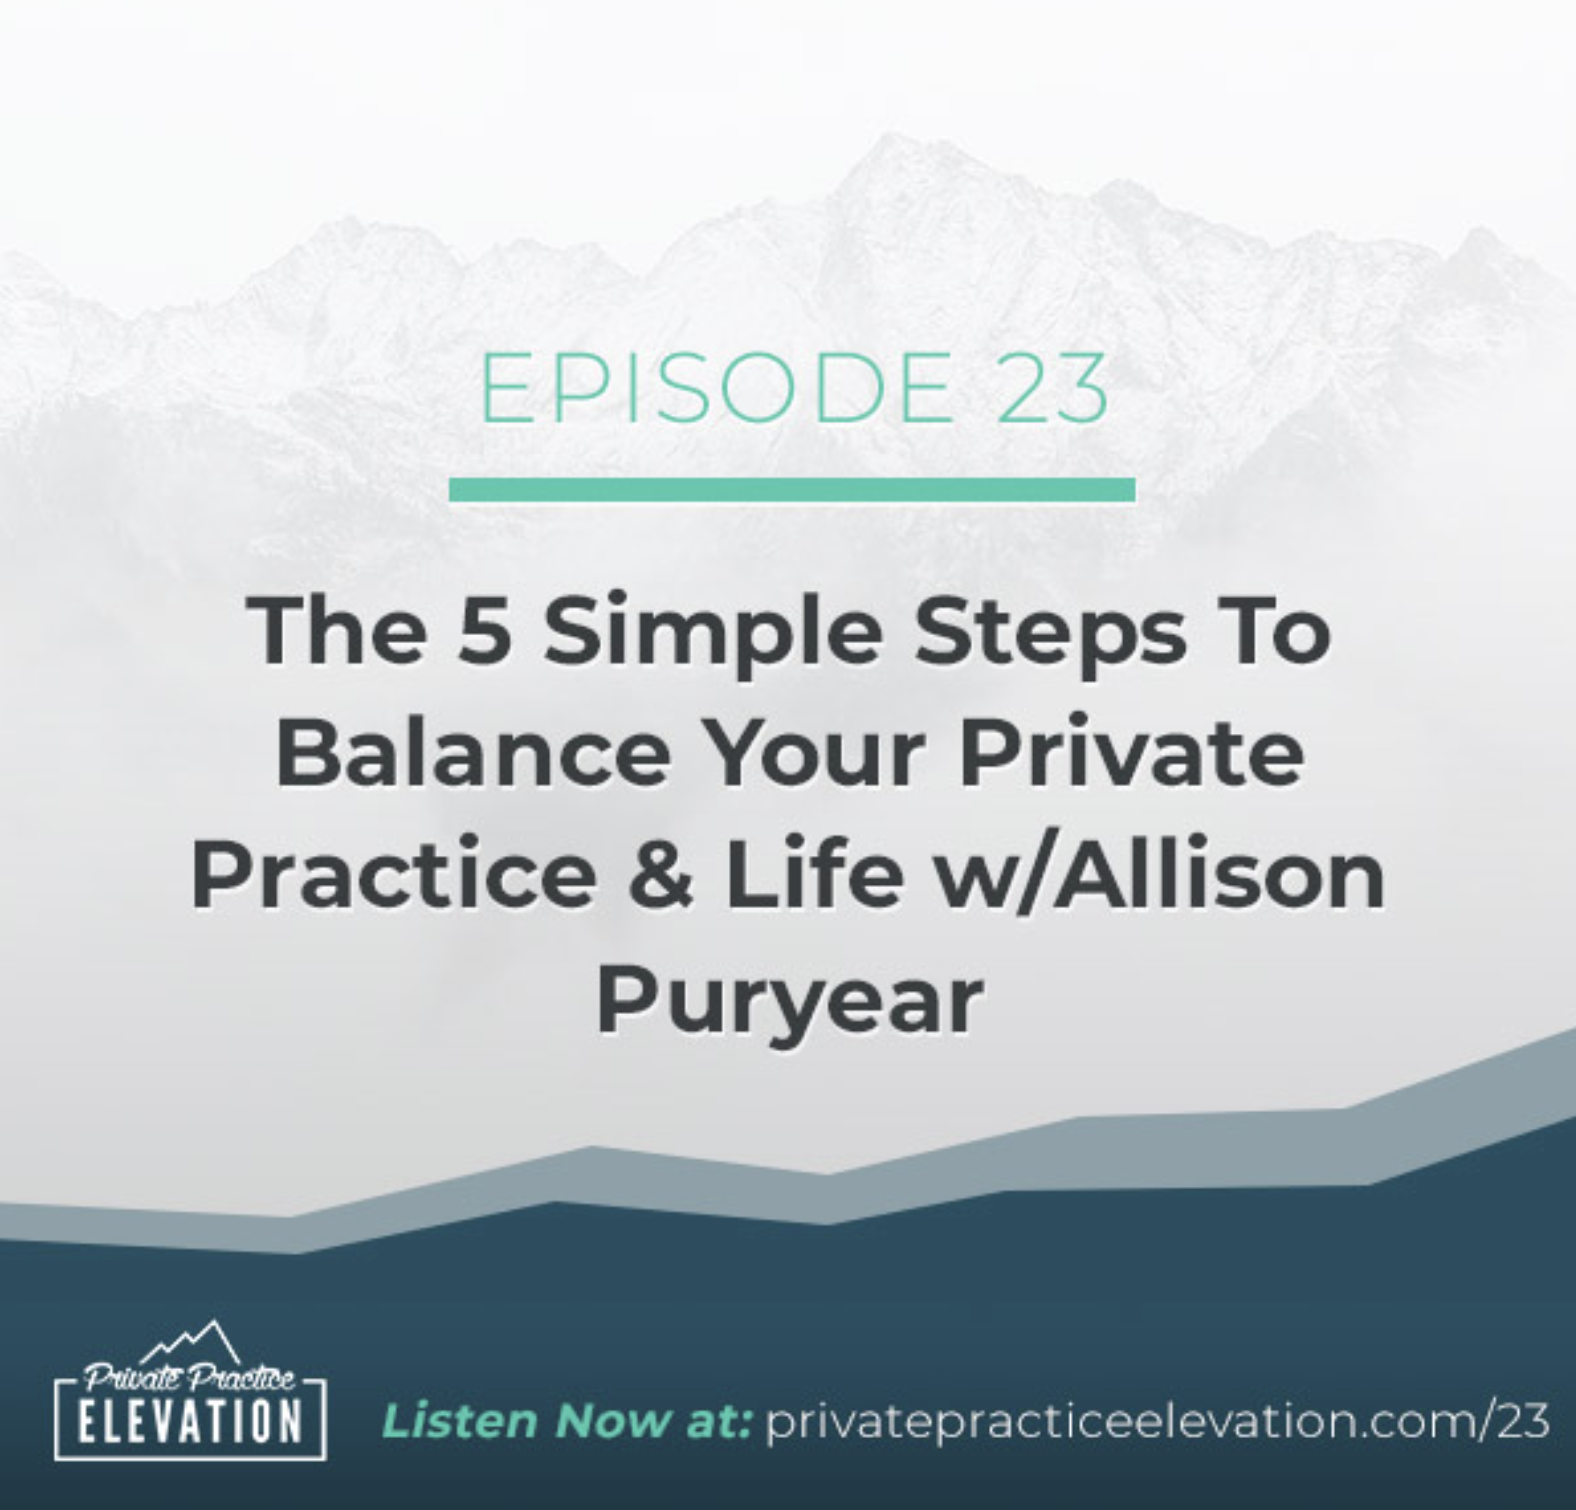 The 5 Simple Steps To Balance Your Private Practice & Life with Allison Puryear